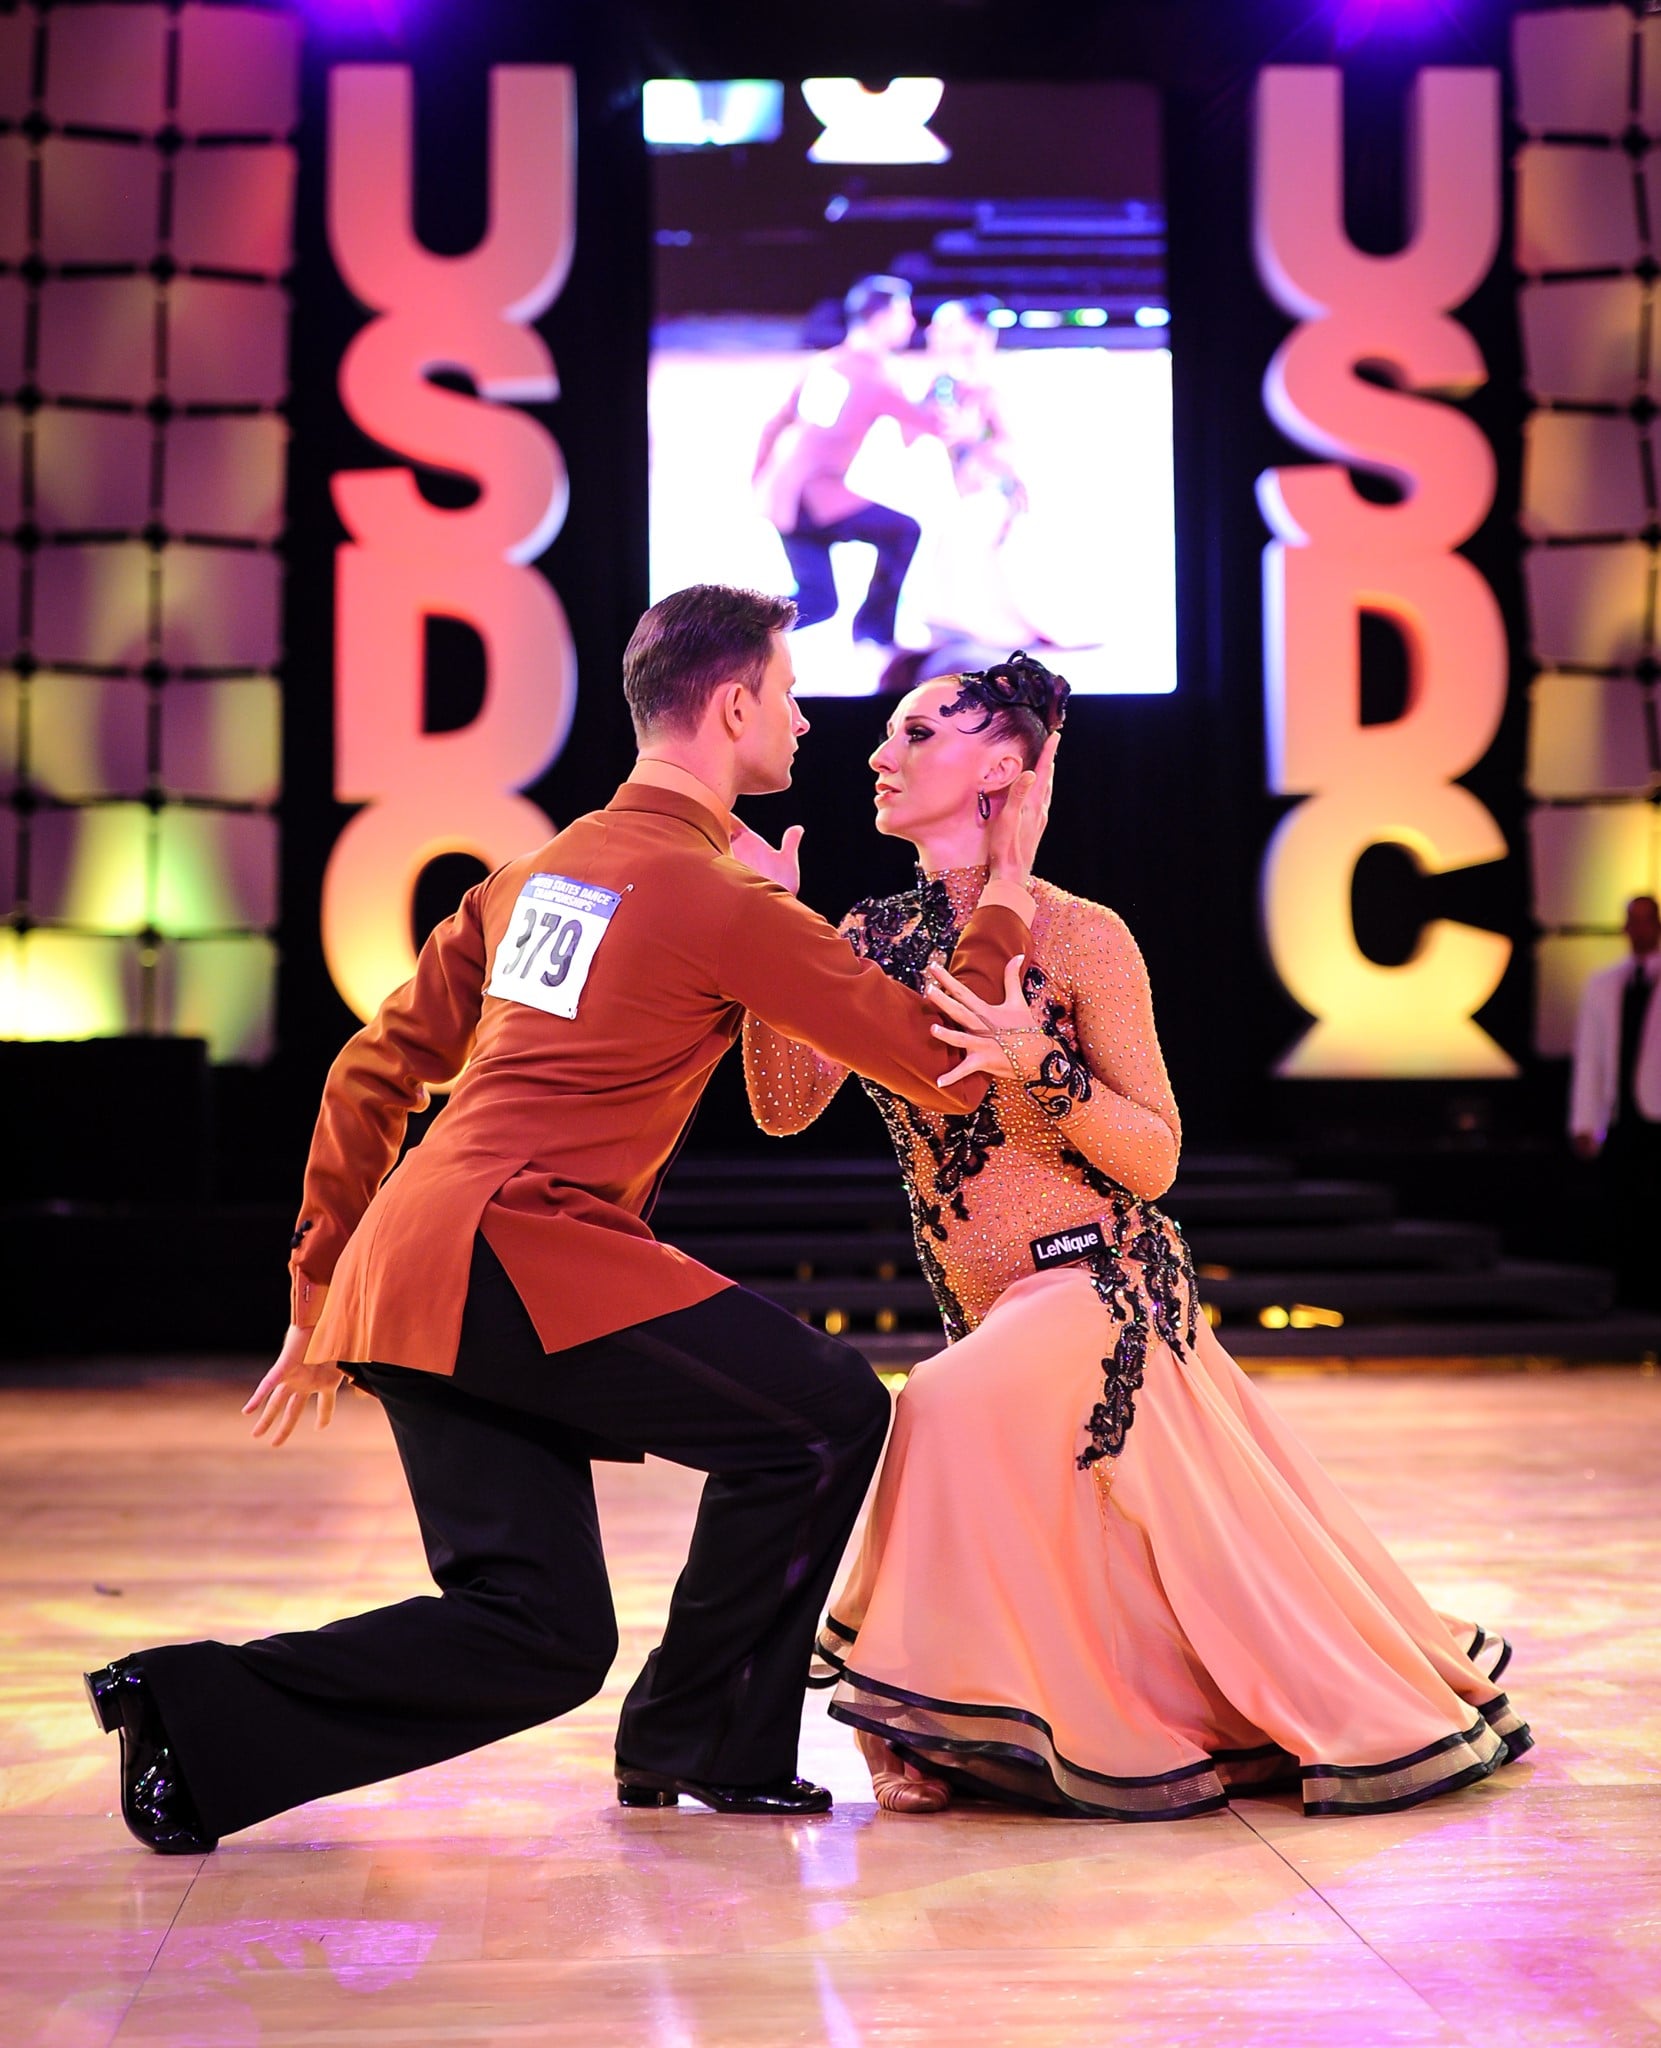 Image for the blog: How Marzena Stachura Discovered Ballroom Dance